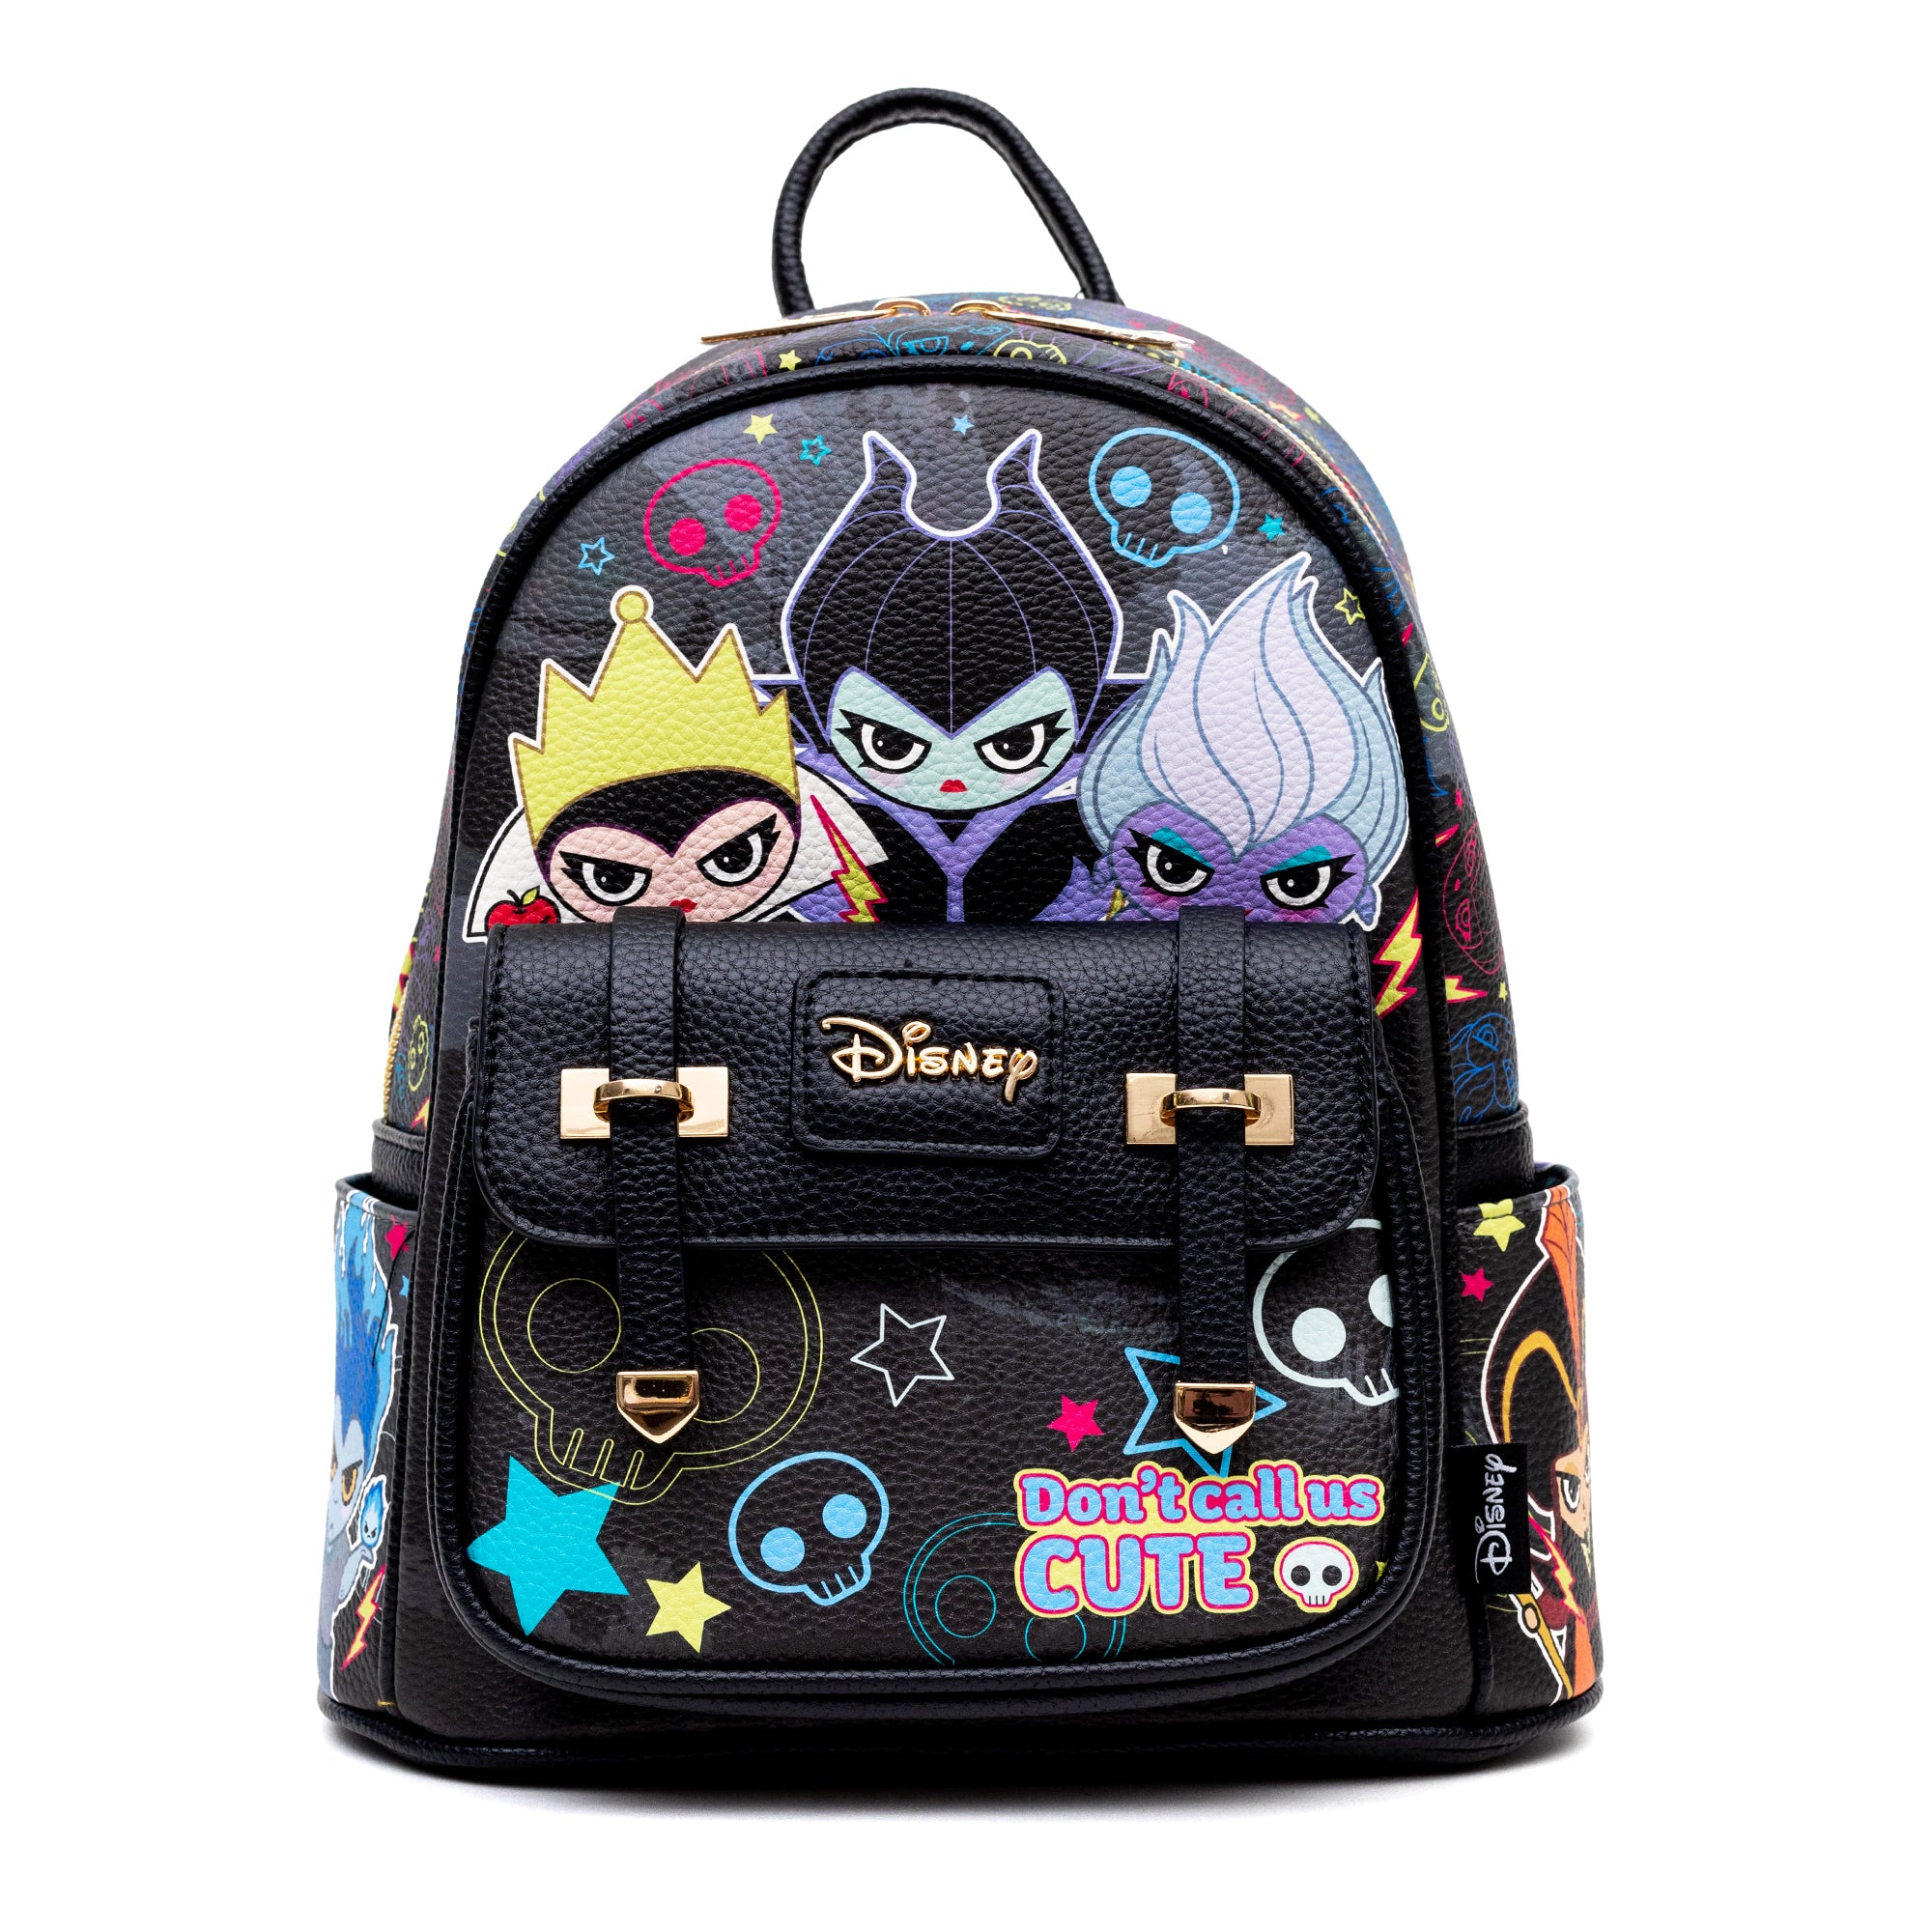 Disney Cutie Villains Backpack - Limited Edition